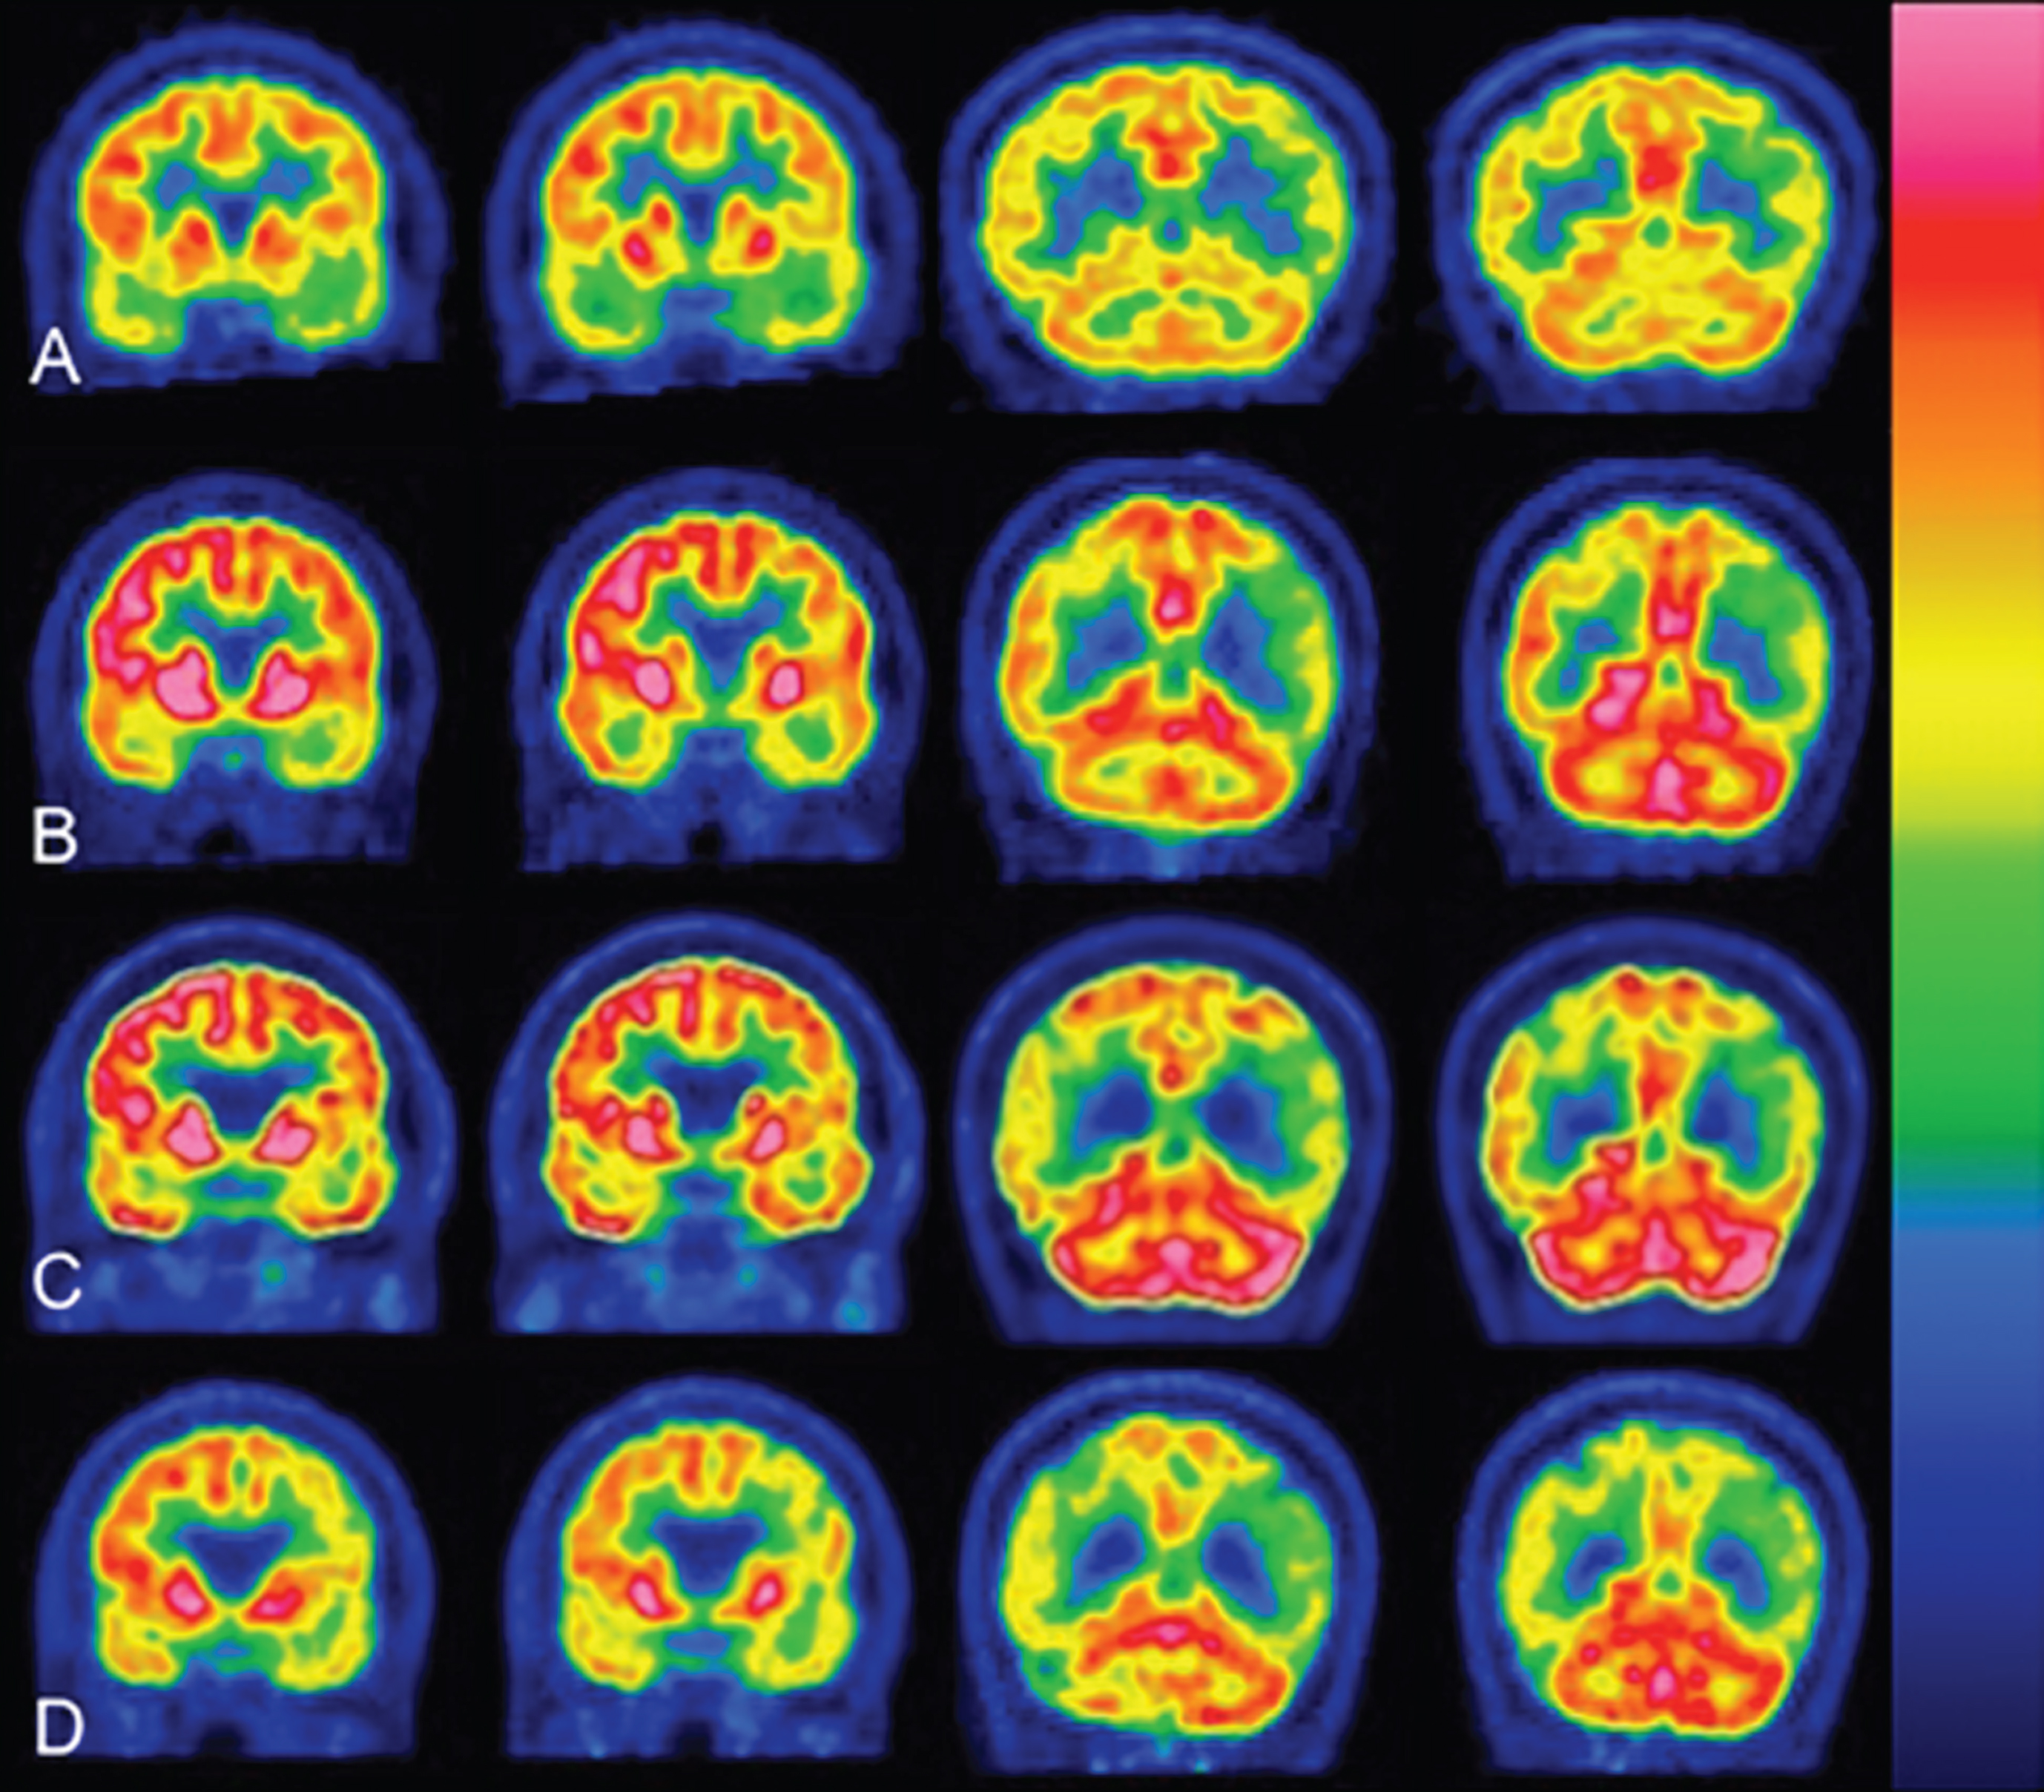 18 FDG PET-scan coronal sections. Matching of representative coronal sections showed a significant increase in the brain metabolism during NGF-treatment (10 μl NGF daily). Flame scale indicates FDG use/100 g tissue/min. Red color indicates more FDG-use than blue. A) Before treatment, note the FDG-uptake reduction in the following brain areas: frontotemporal lobes left>right, basal ganglia, cerebellum and occipital lobes. B) After 3 months of NGF-treatment (5 μl NGF per nostril daily), note a significant increase in FDG-uptake (p <  0.05) in the following brain areas: frontotemporal lobes, thalamus, basal ganglia, occipital lobes, cerebellum, and dentate nucleus. C) After 1 year of NGF-treatment (5 μl NGF per nostril daily), the PET scans showed further enhancement of FDG-uptake (p <  0.05) in the same brain areas as in (B) and also in the parahippocampal areas. D) After 1 year of stopping NGF-treatment, the brain areas showed a significant reduction in global activities.